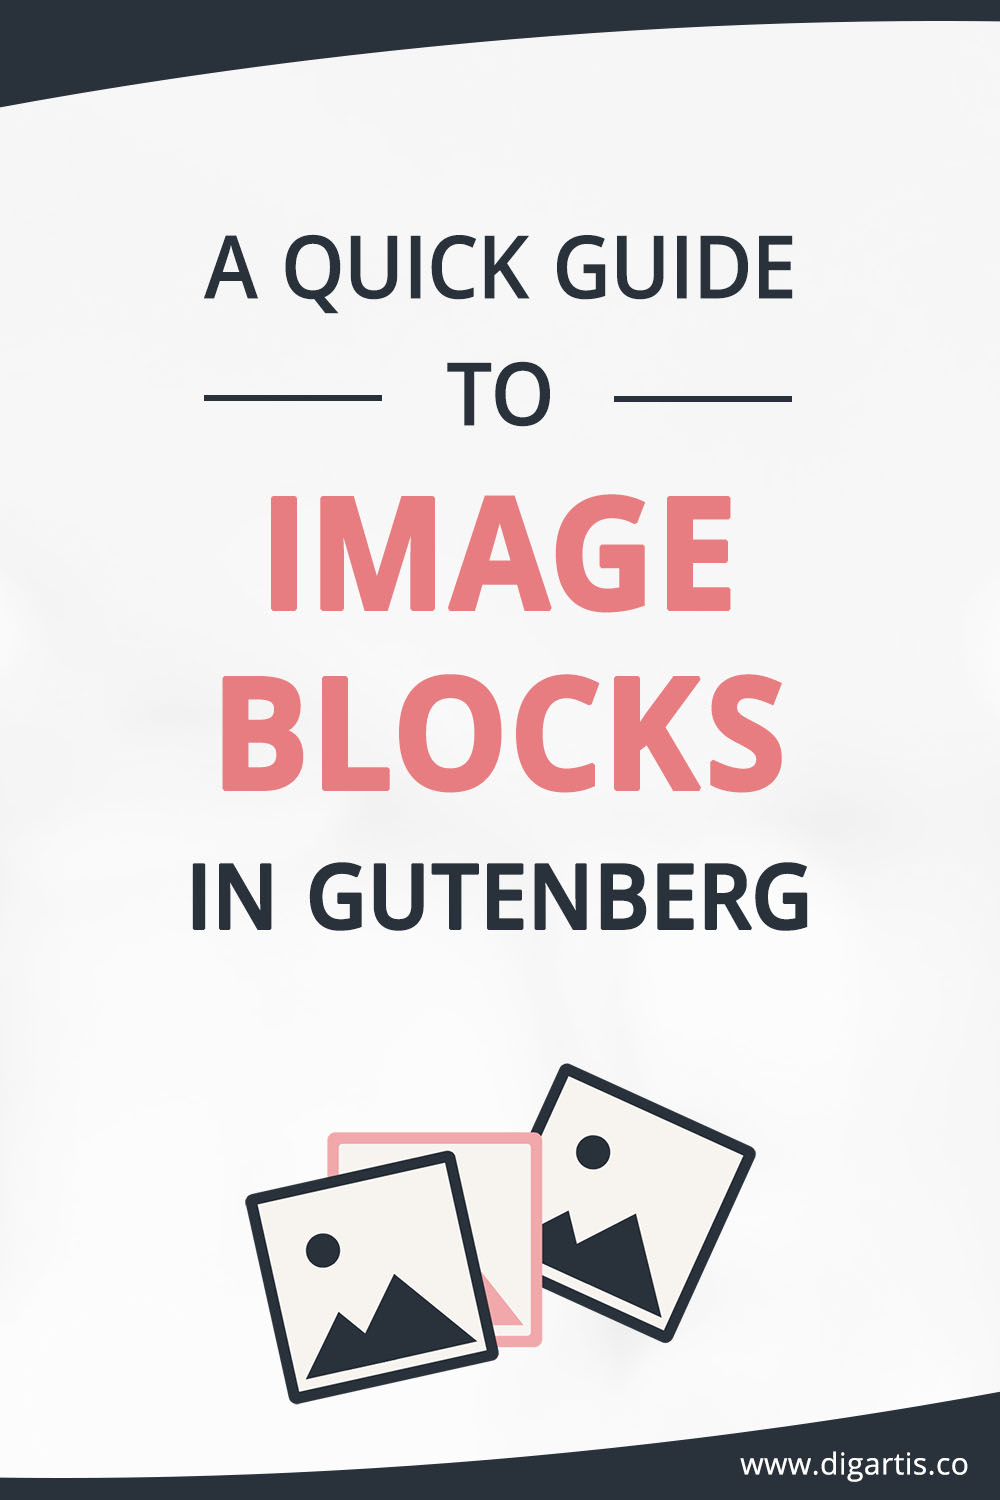 A quick guide to image blocks in Gutenberg